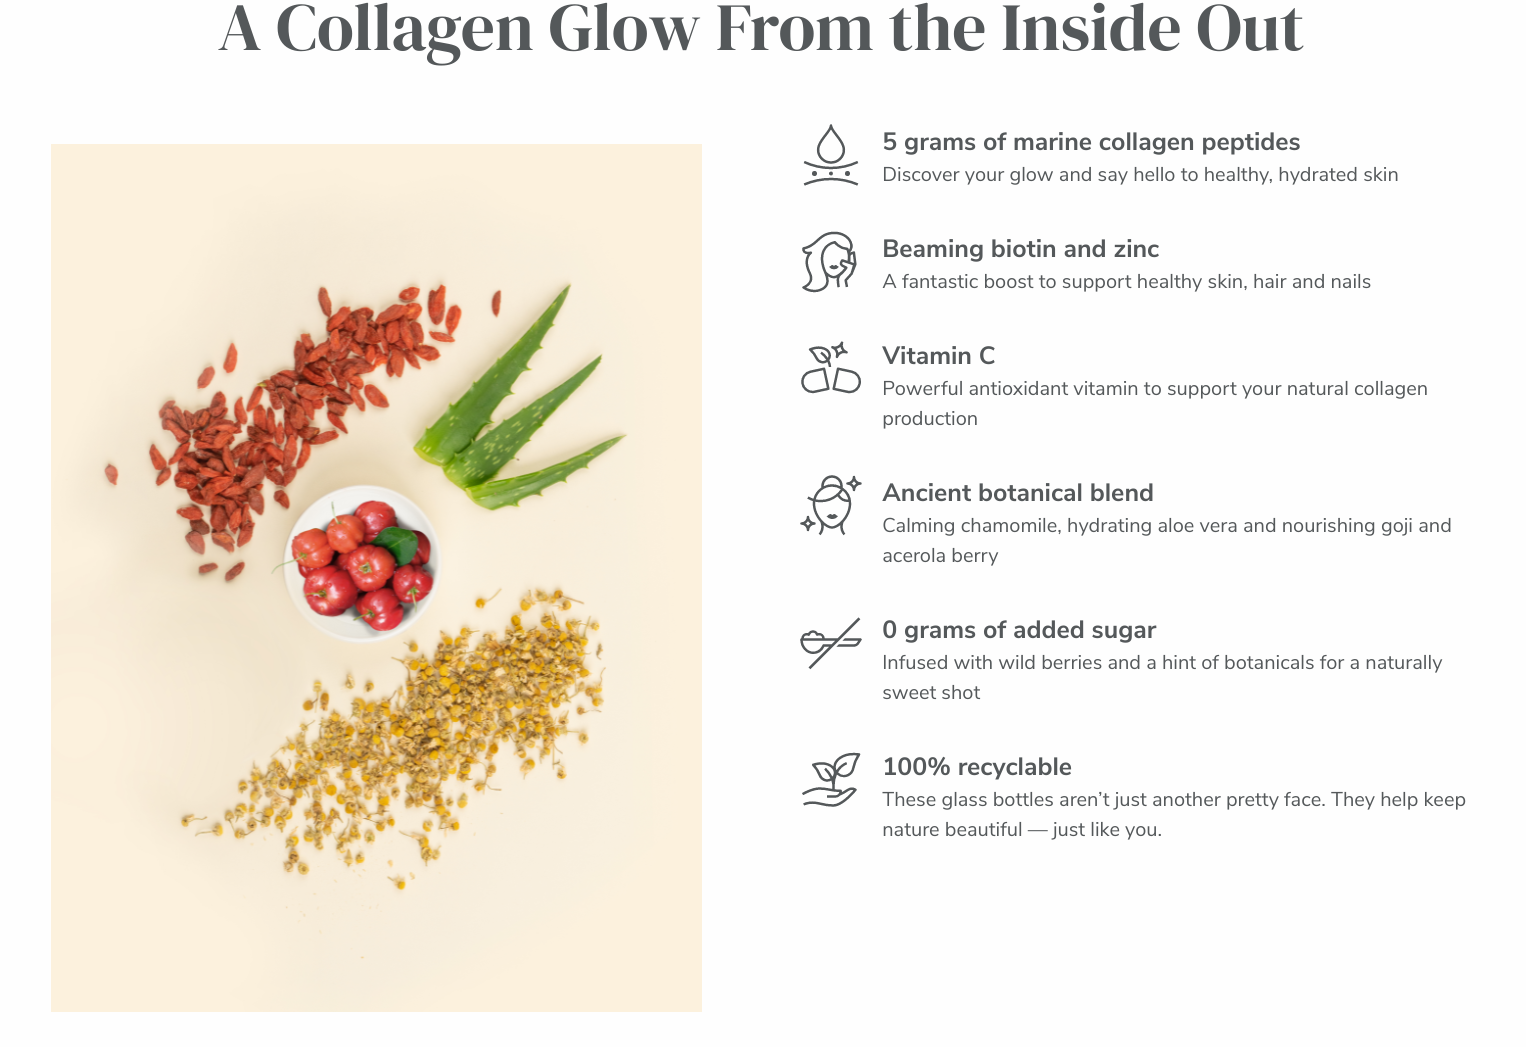 Collagen-Glow-Fron-Inside-Out